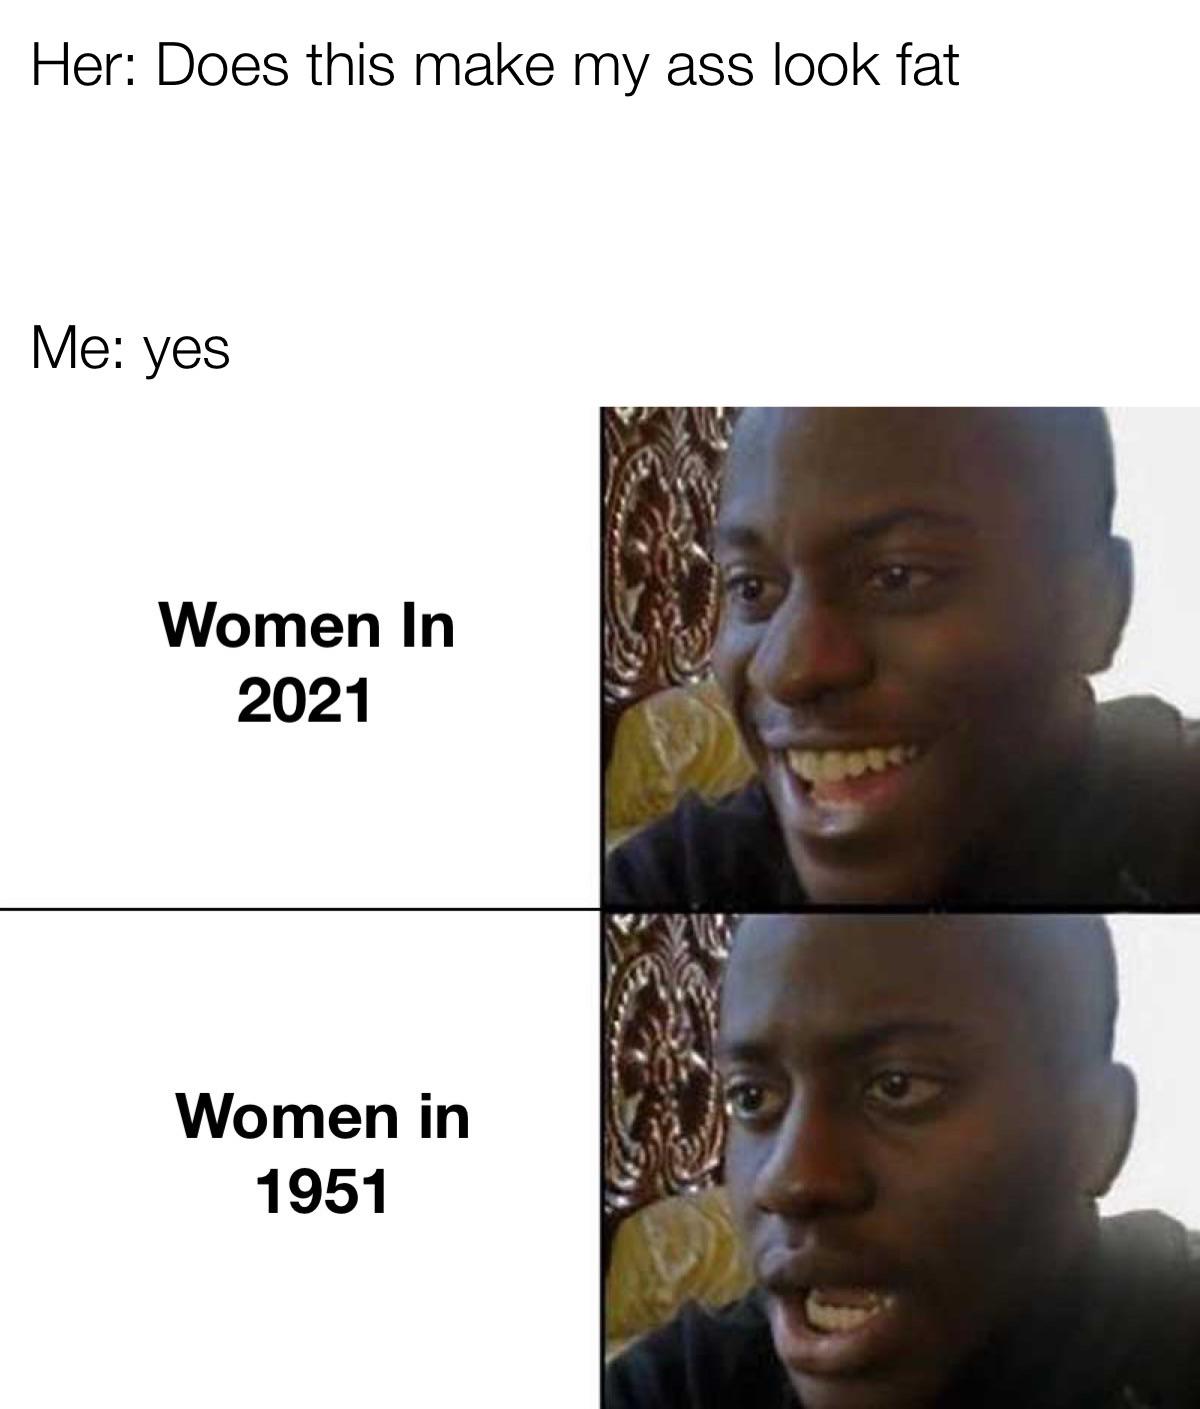 memes of school - Her Does this make my ass look fat Me yes Women In 2021 Women in 1951